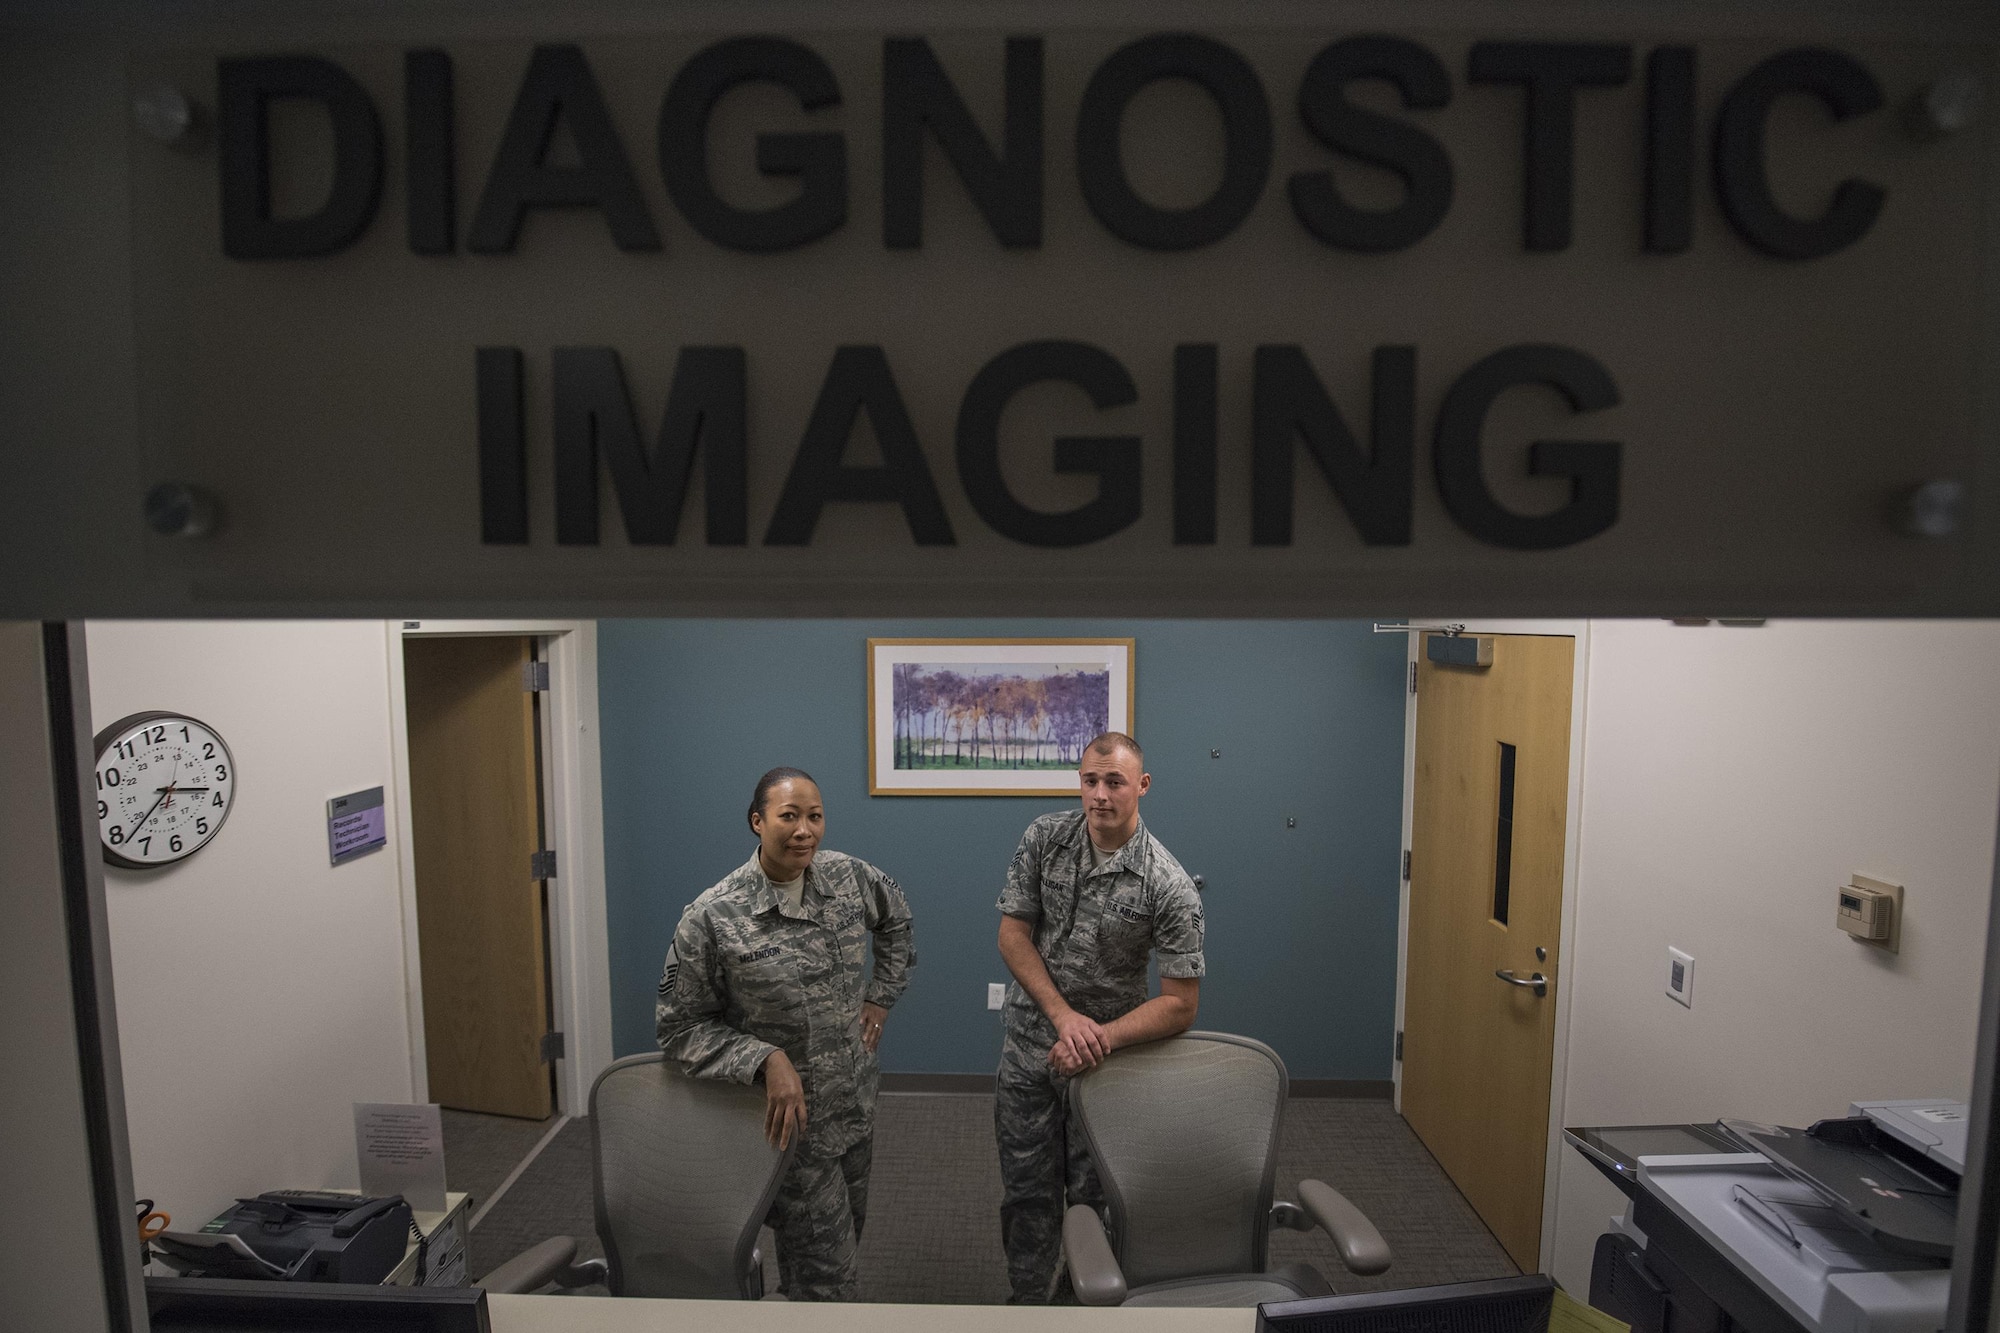 Master Sgt. Tracey McLendon, 23d Medical Support Squadron flight chief of diagnostic imaging, and Senior Airman Jeffrey Nelligan, 355th Medical Support Squadron diagnostic imagining technologist, pose for a photo at the front desk of the radiology section, Oct. 24, 2016, at Moody Air Force Base, Ga. Without the radiology section, the timeliness of diagnosis could slow drastically and patients would be forced to find a local clinic or hospital for their imaging. (U.S. Air Force photo by Airman 1st Class Daniel Snider)